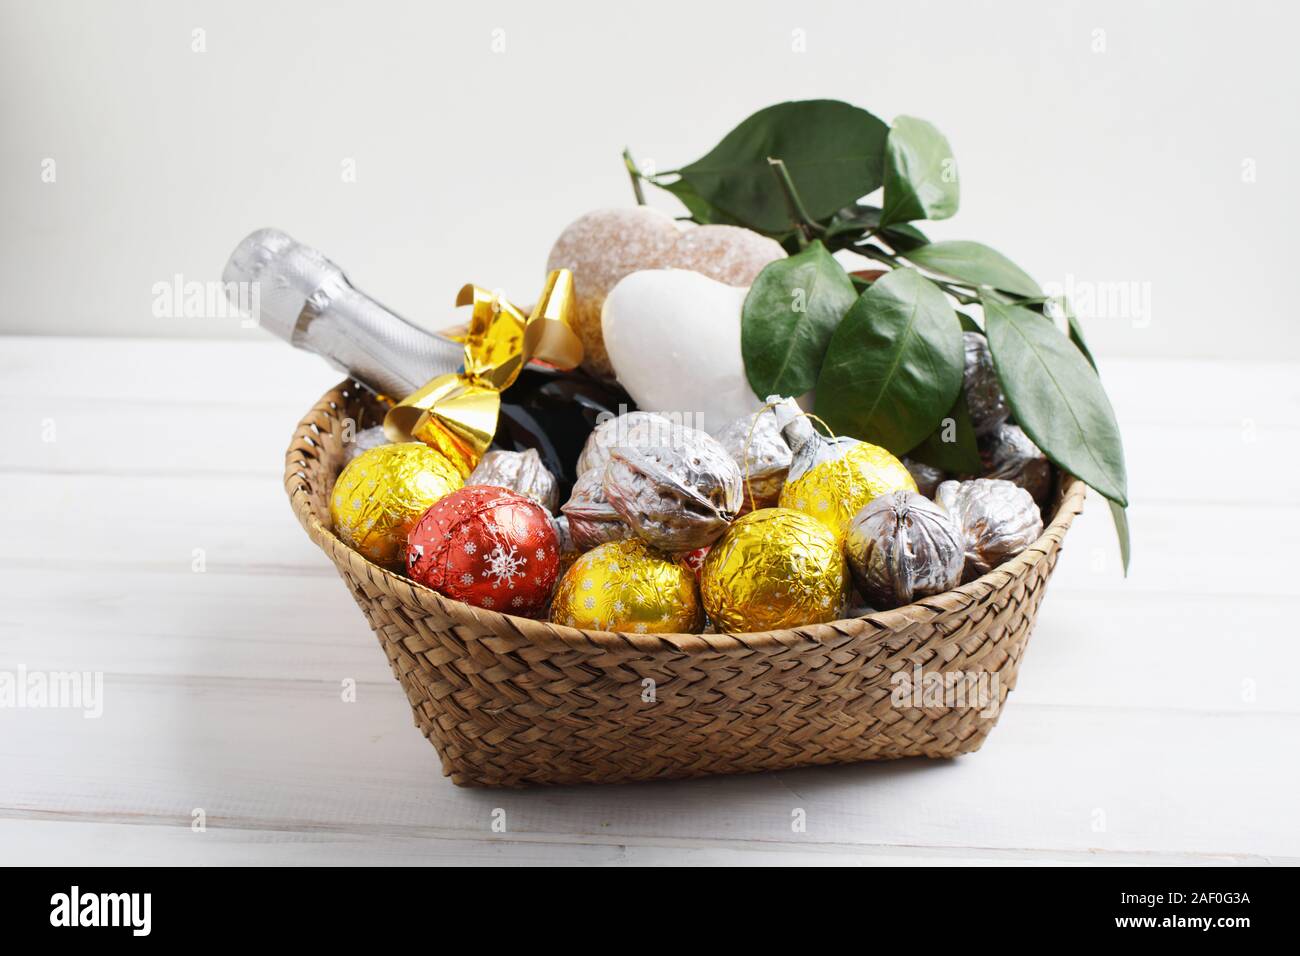 Christmas gift basket with chocolate candies, walnuts, gingerbread, mandarin oranges, and a bottle of champagne Stock Photo